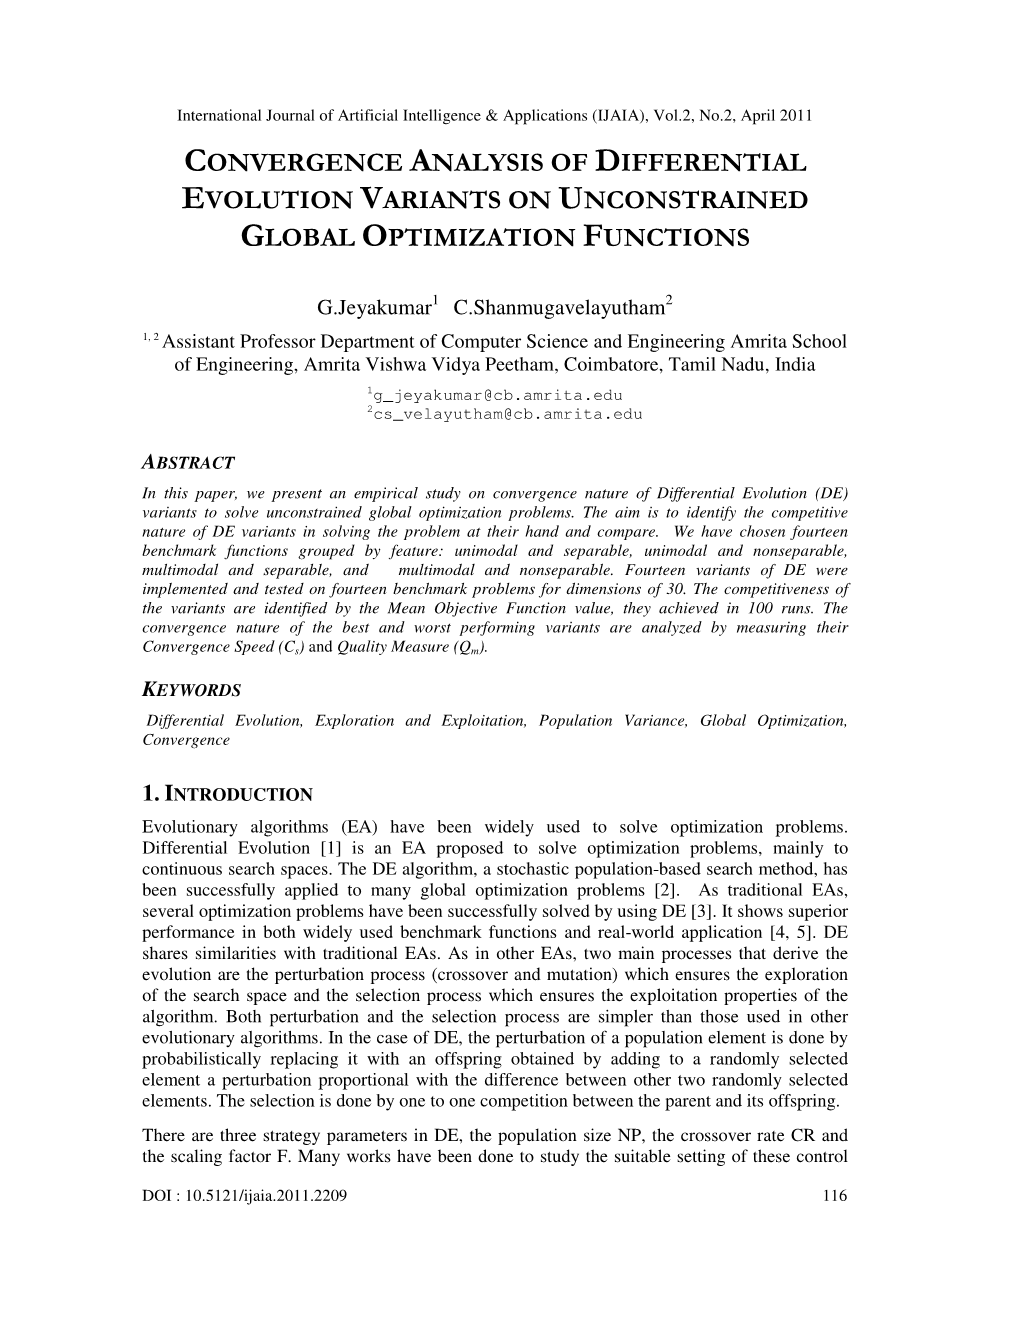 Convergence Analysis of Differential Evolution Variants on Unconstrained Global Optimization Functions